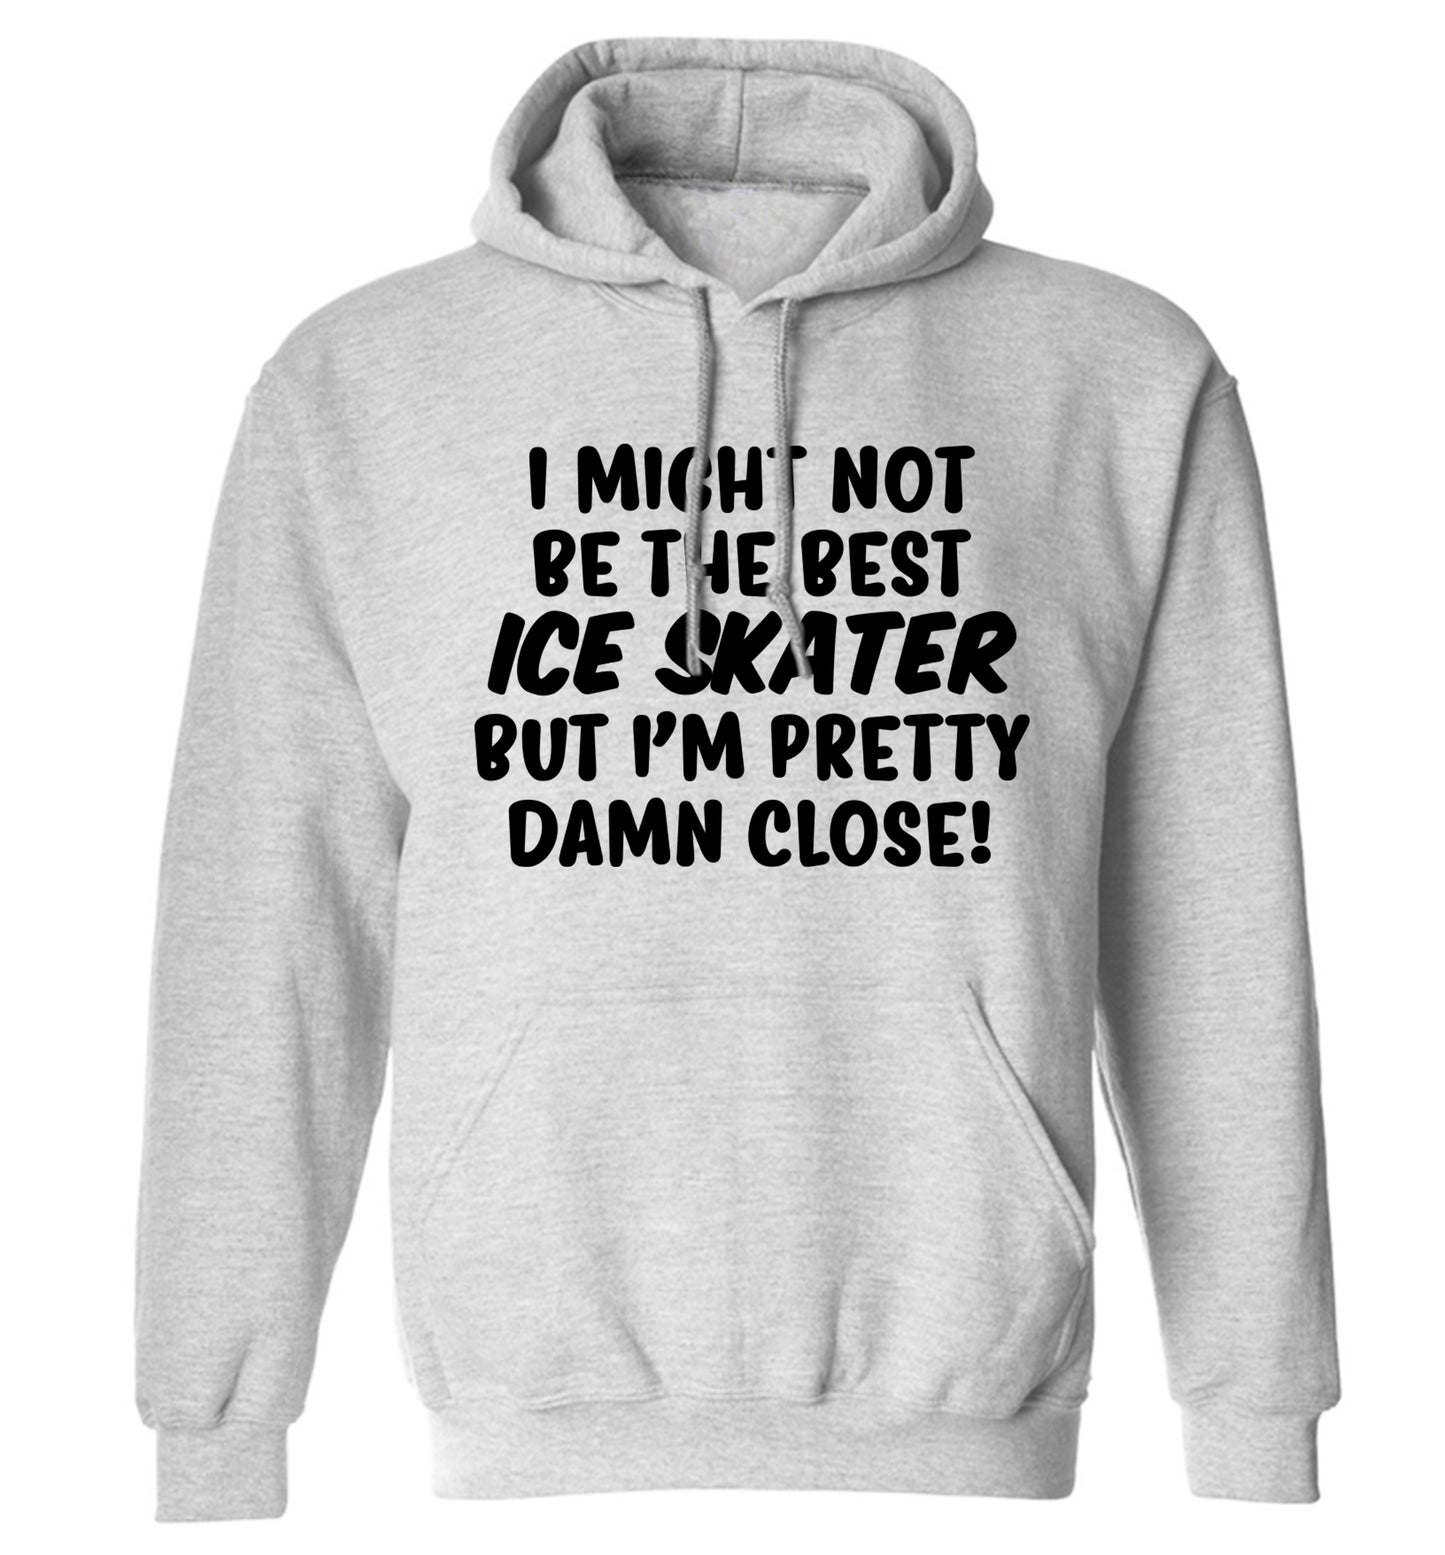 I might not be the best ice skater but I'm pretty damn close! adults unisexgrey hoodie 2XL